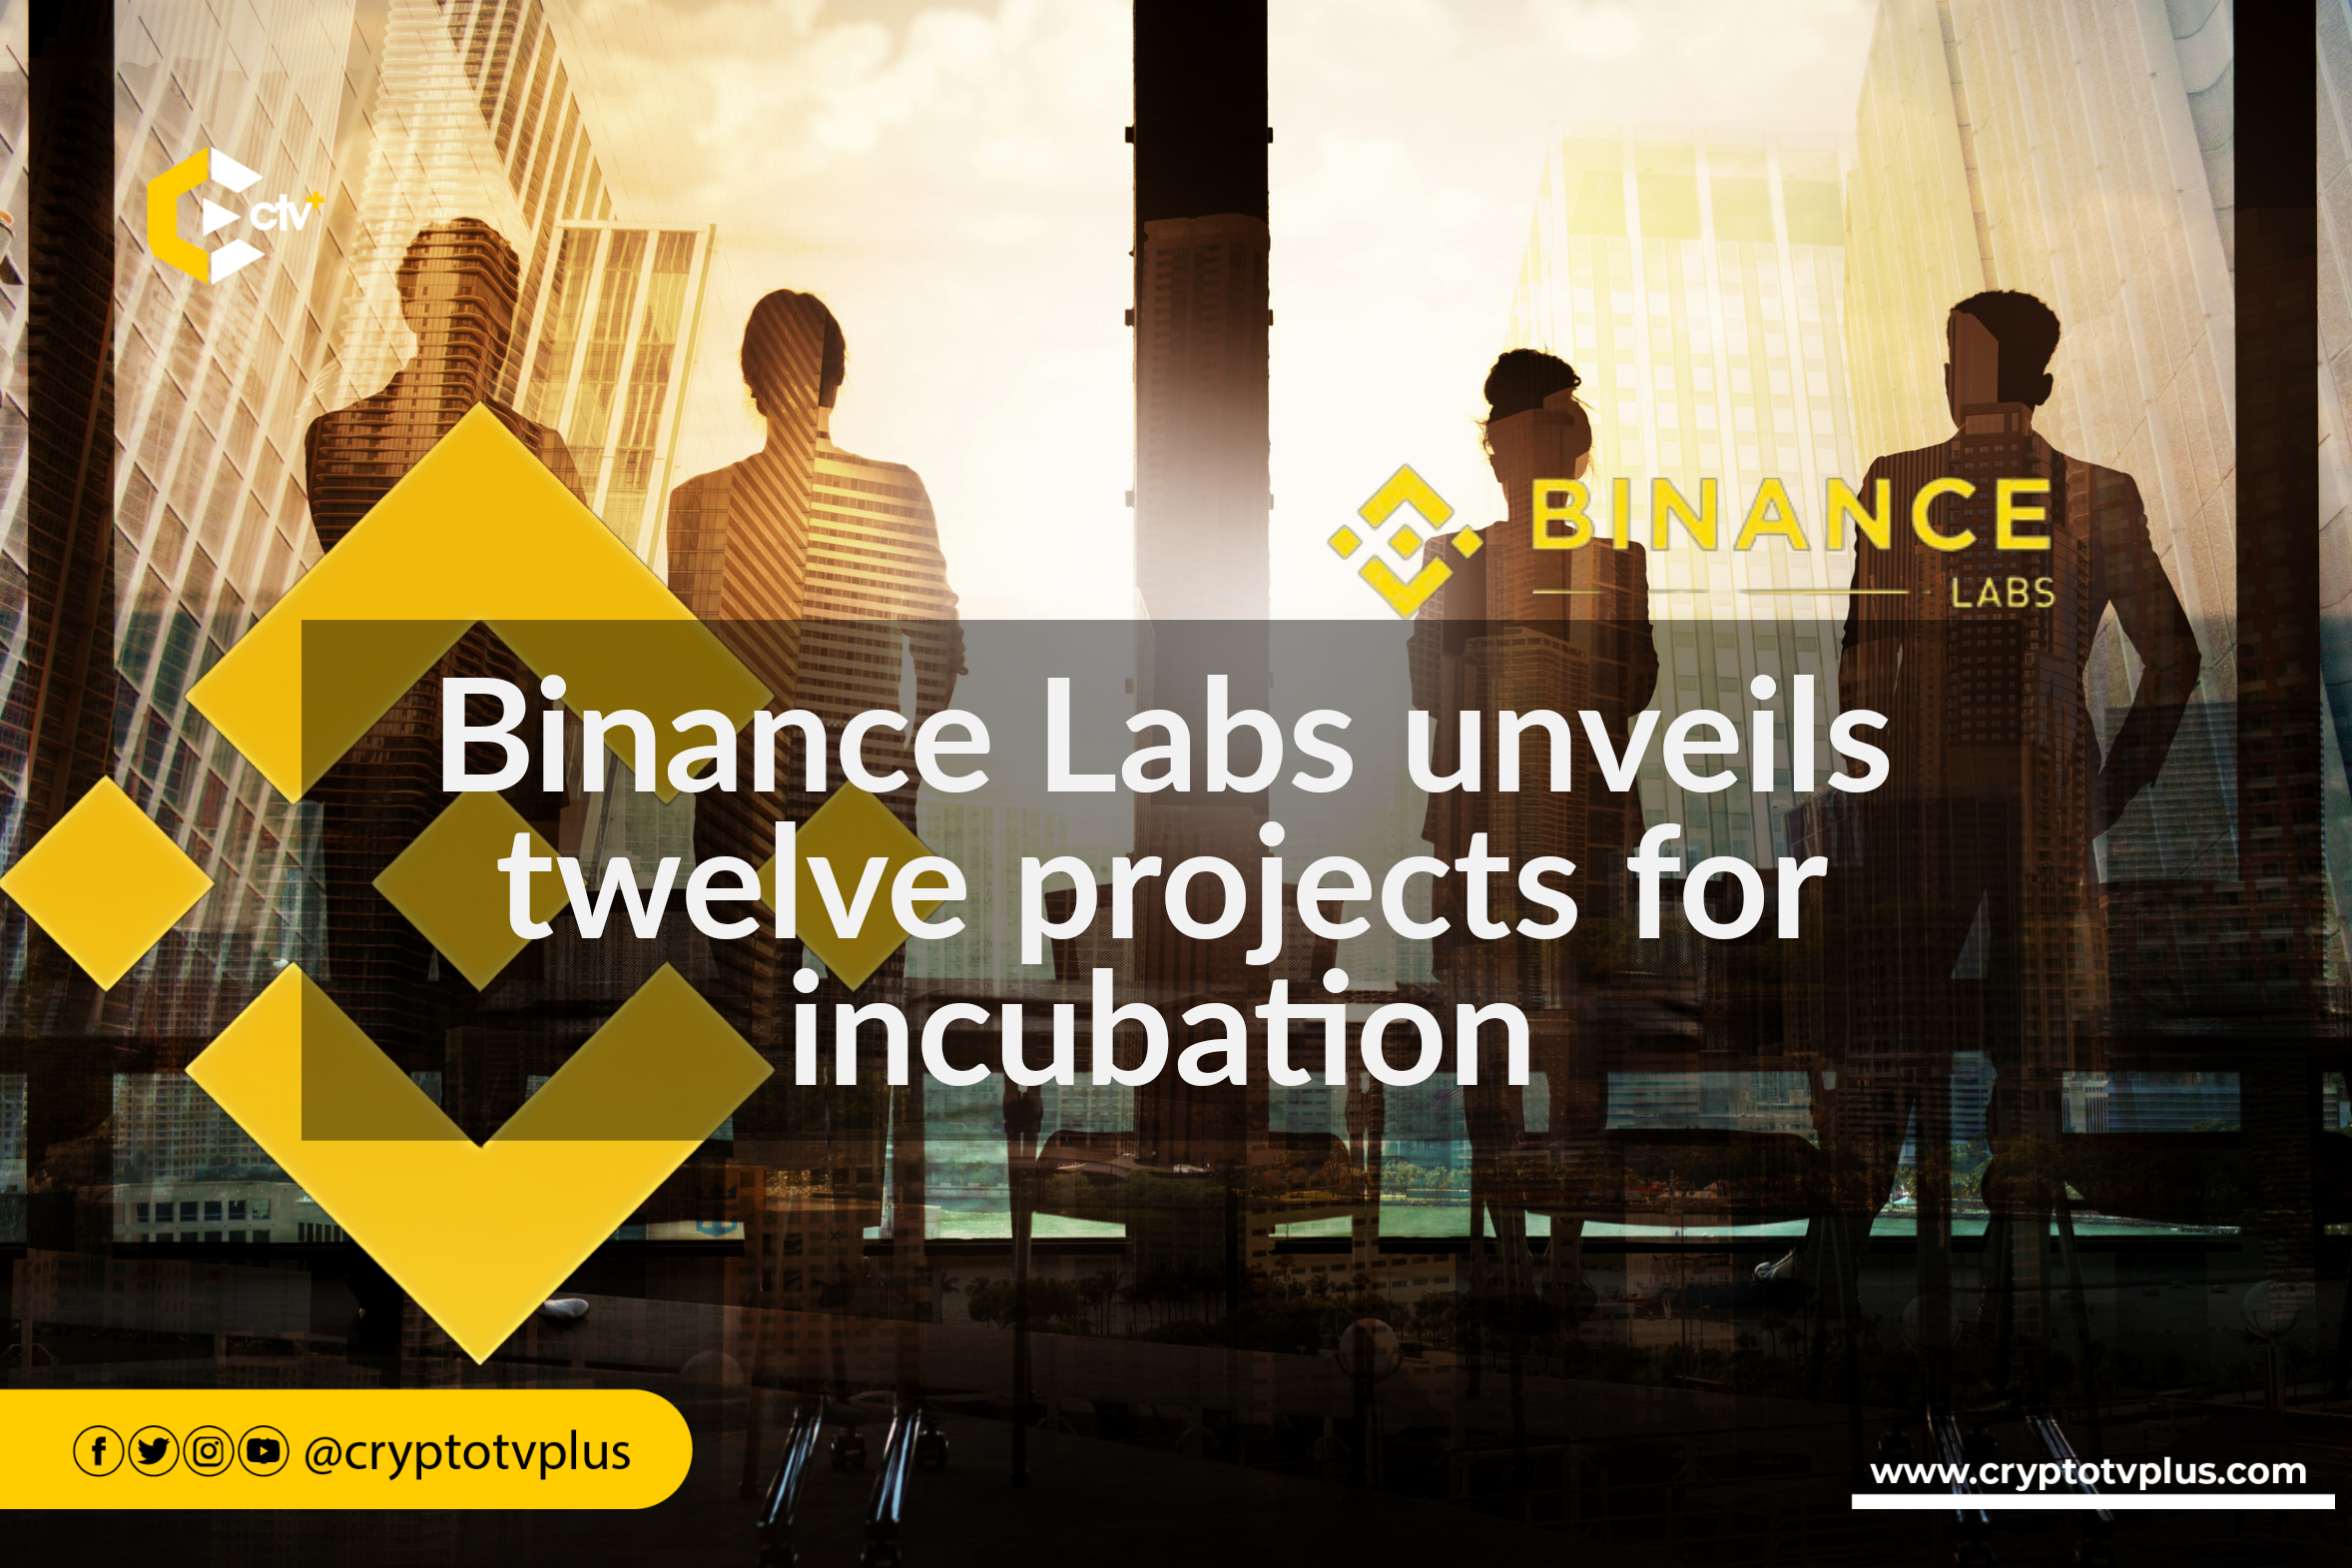 Binance Labs unveils 12 projects for incubation